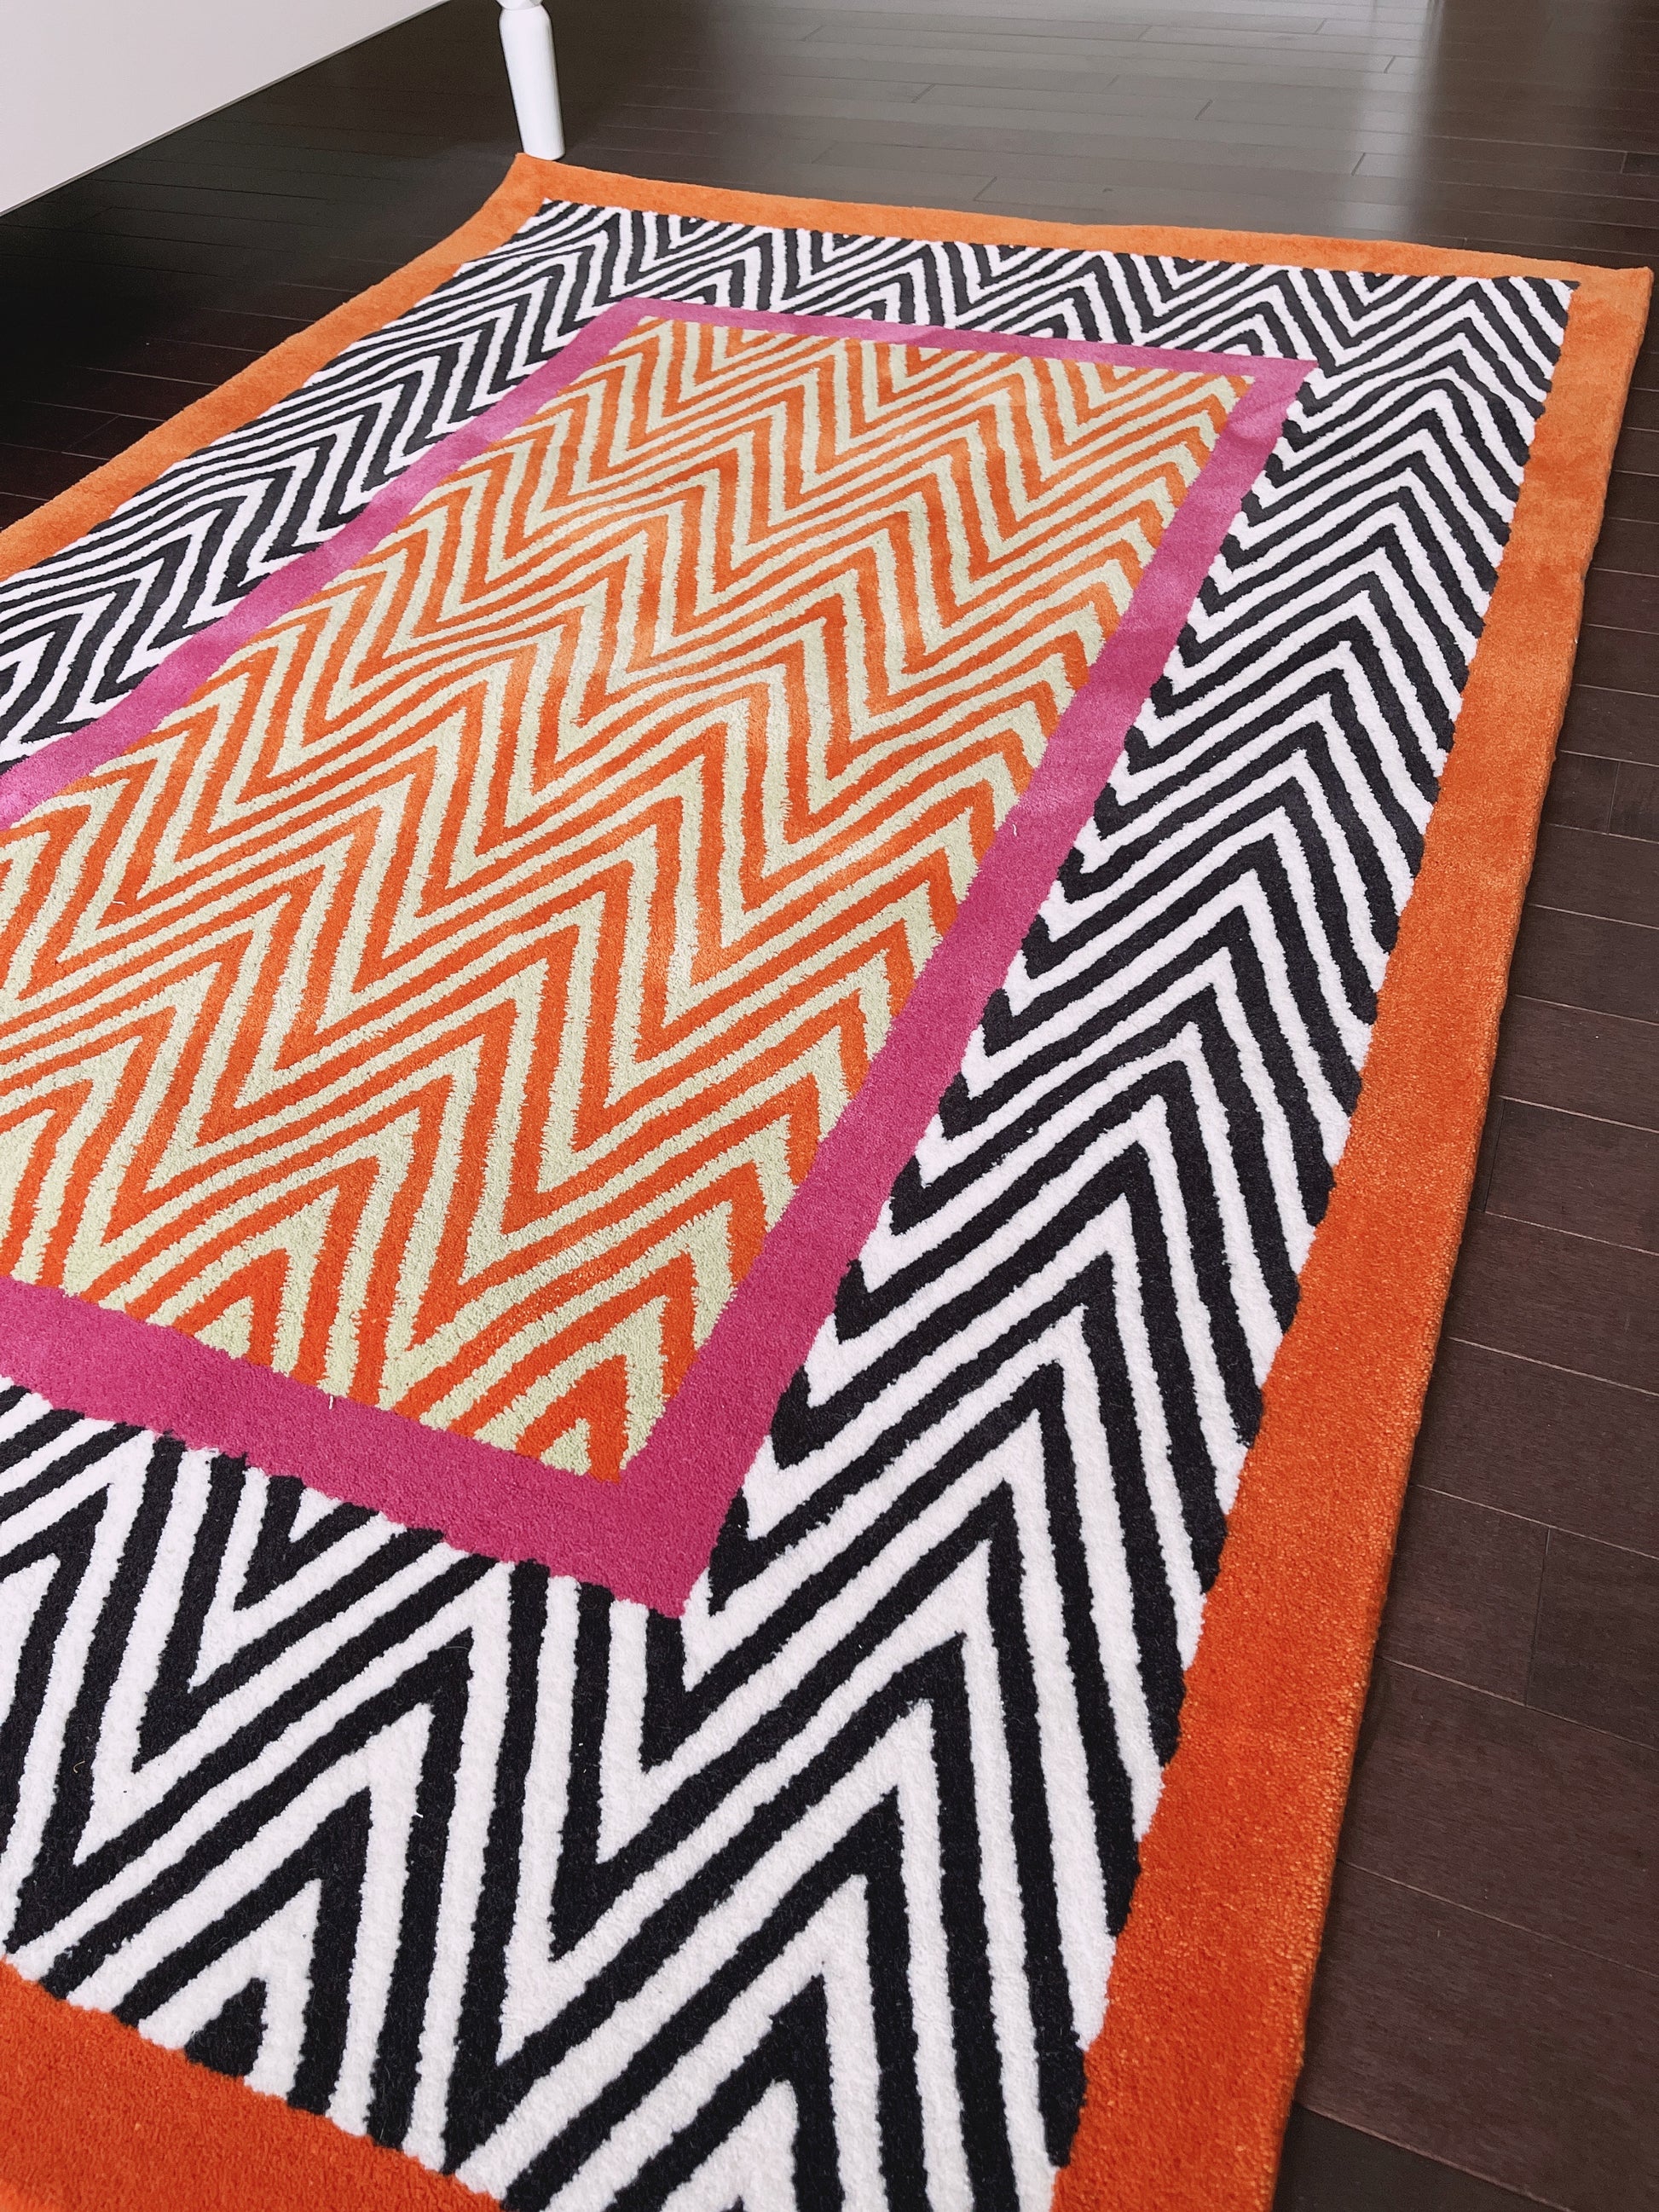 4’ X 6’ Large Area Rug, Wool Rectangle Rug, Hand Knotted Colorful Living Room Rug, Black and Orange Geometric Living Room Décor